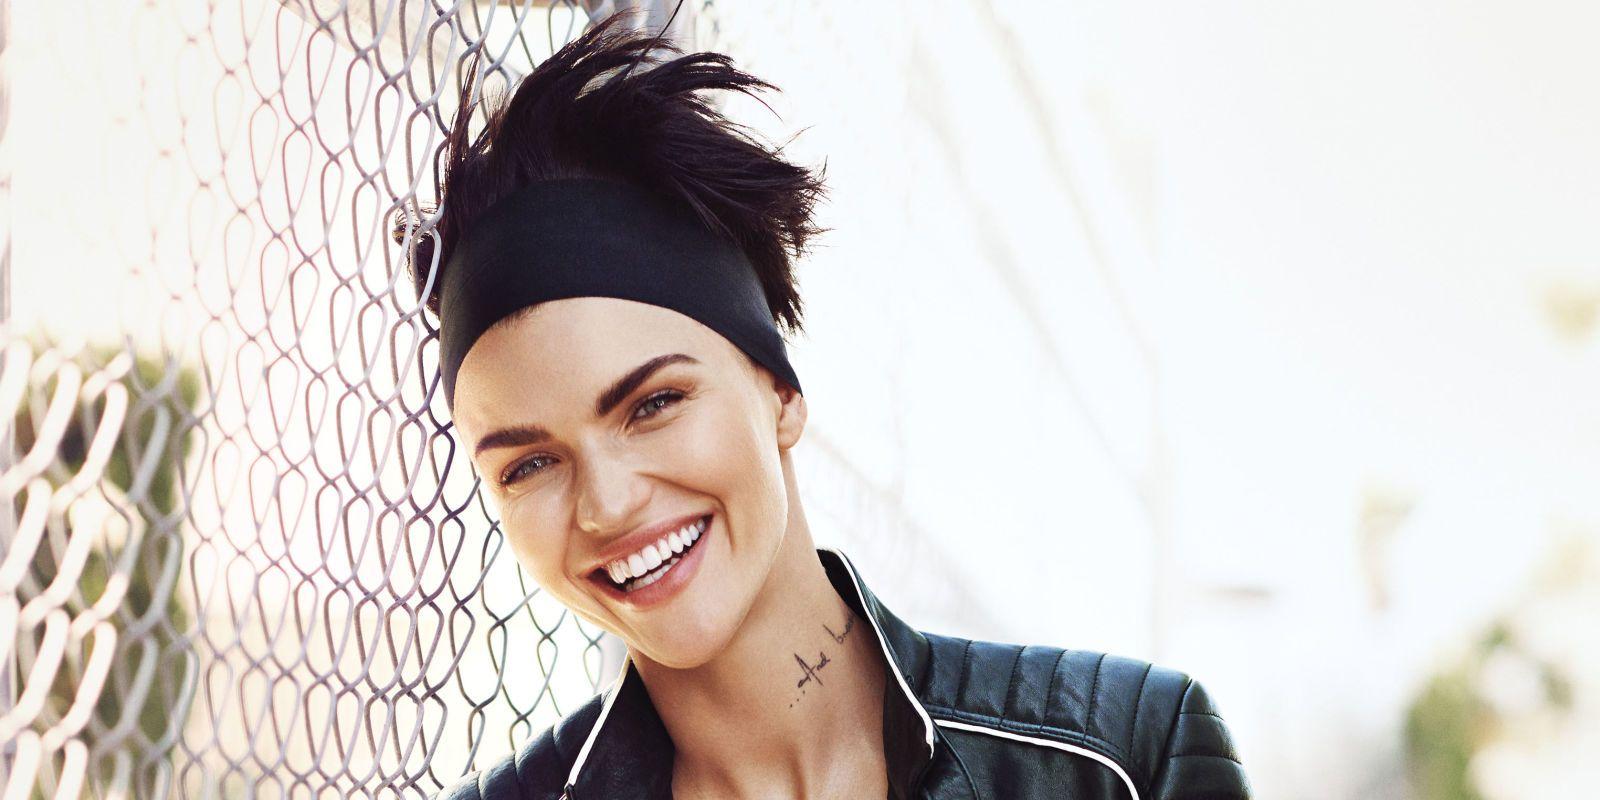 Ruby Rose Wallpapers 74 pictures